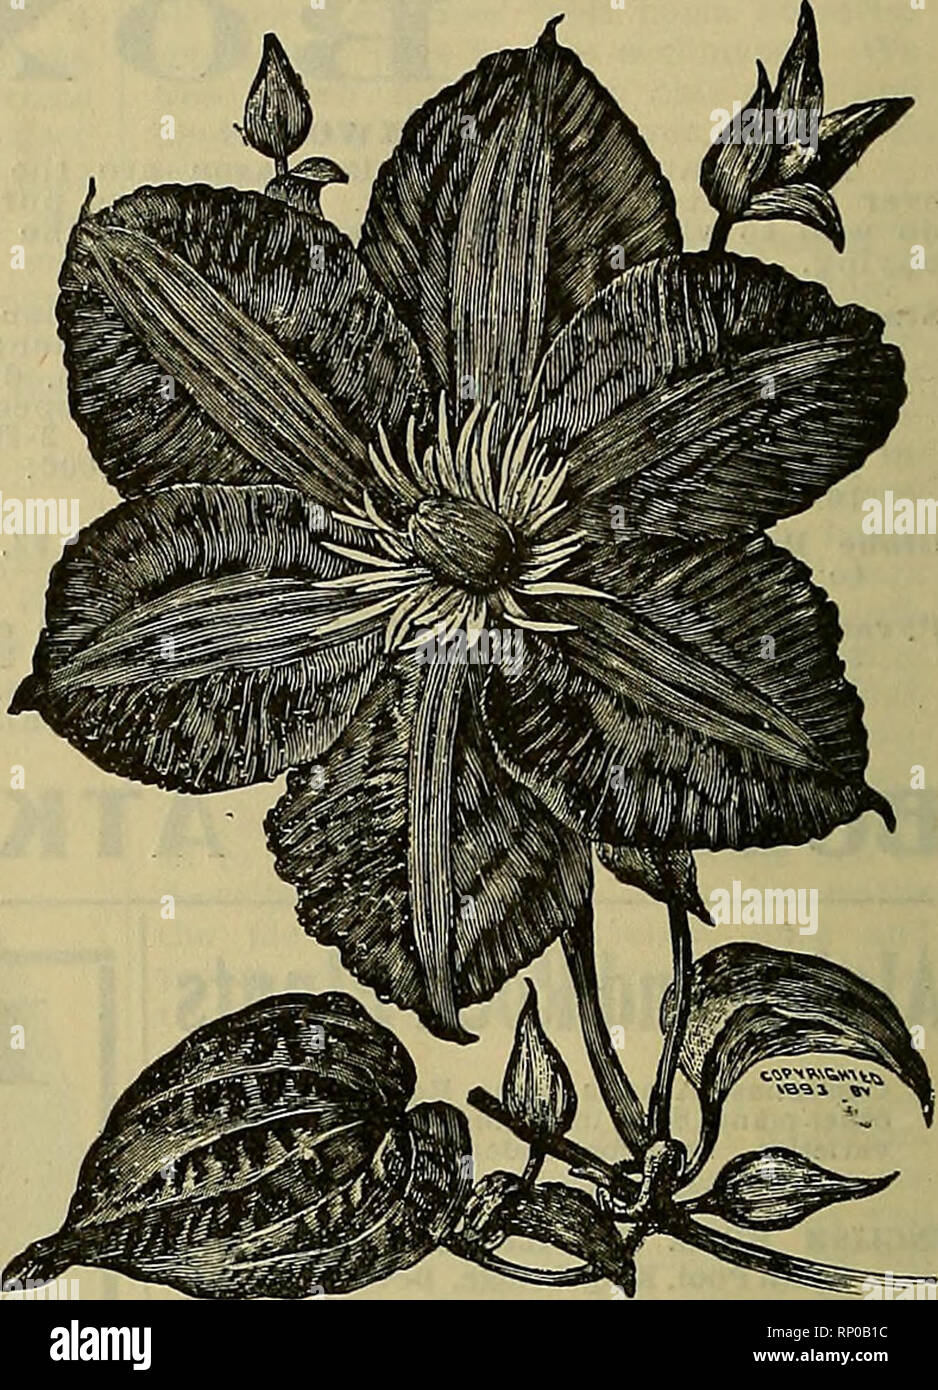 . The American florist : a weekly journal for the trade. Floriculture; Florists. 638 The American Florist. April i8, Dreer's llardy Climbers. Clematis Hybrids, such as Jackmanl, Jackmanl Superba, per doz. Per 100 Henryl, Duchess of Edinburgh. Fairy Queen, Sieboldi, Gipsy Queen, Lilacina, Floribunda, Mme. Baron Villard, Mme. Van Houtte, Miss Bateman,Standishi, The Gem, The Presi- dent and Ville de Lyon, all in strong two-year-old plants...$3.00 $20.00 Clematis Montana Grandiflora, new early flowering variety, verv desirable 3 ceach 3 00 Clematis Montana Rubens, new, identical with above, except Stock Photo